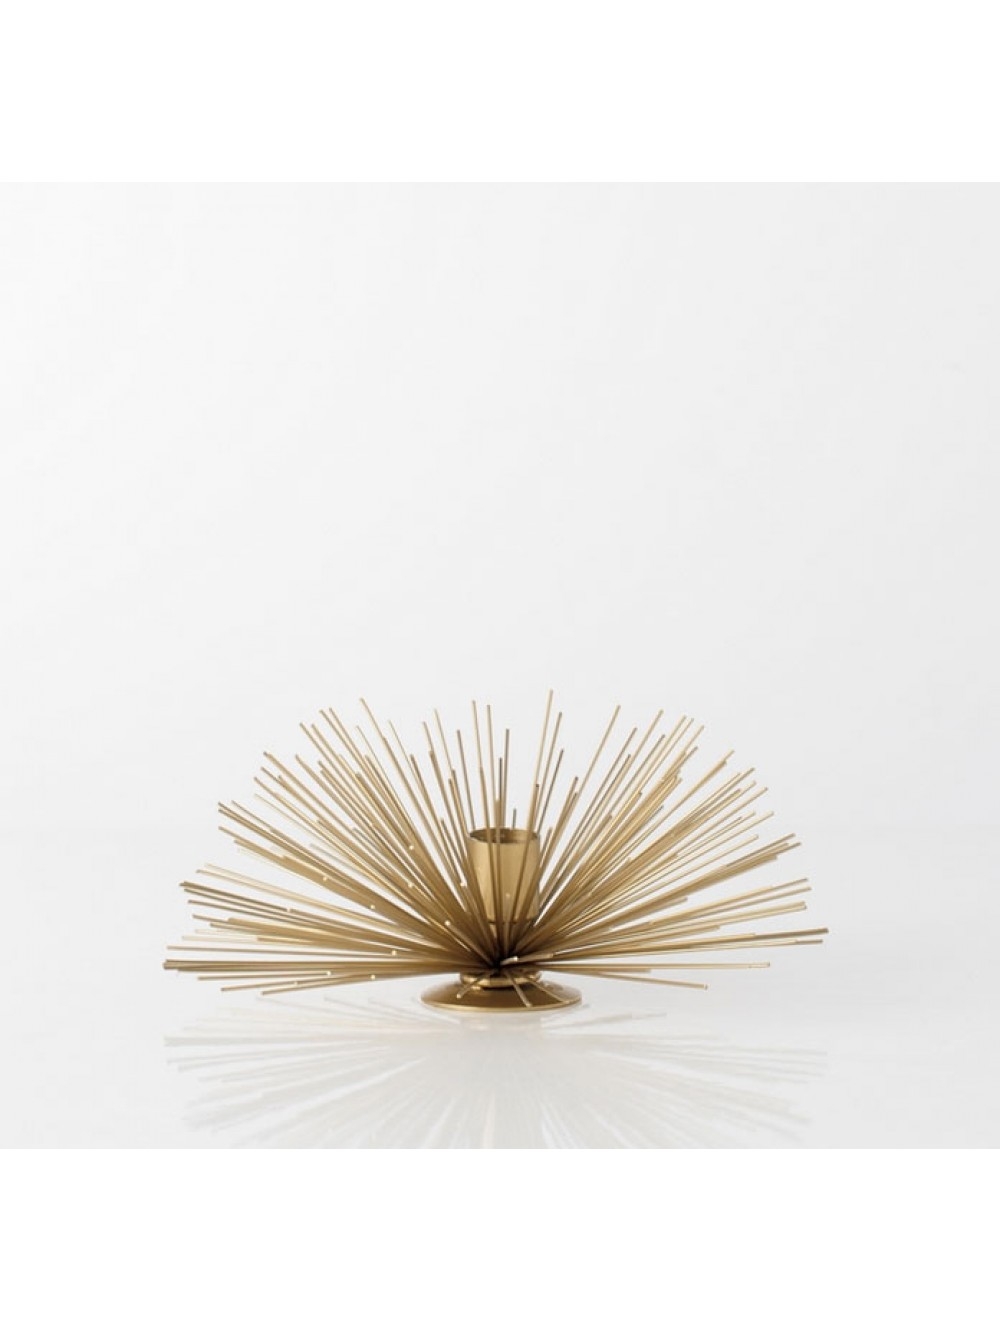 Spiked Candle Holder- 6.5" x 2.5" - Image 0